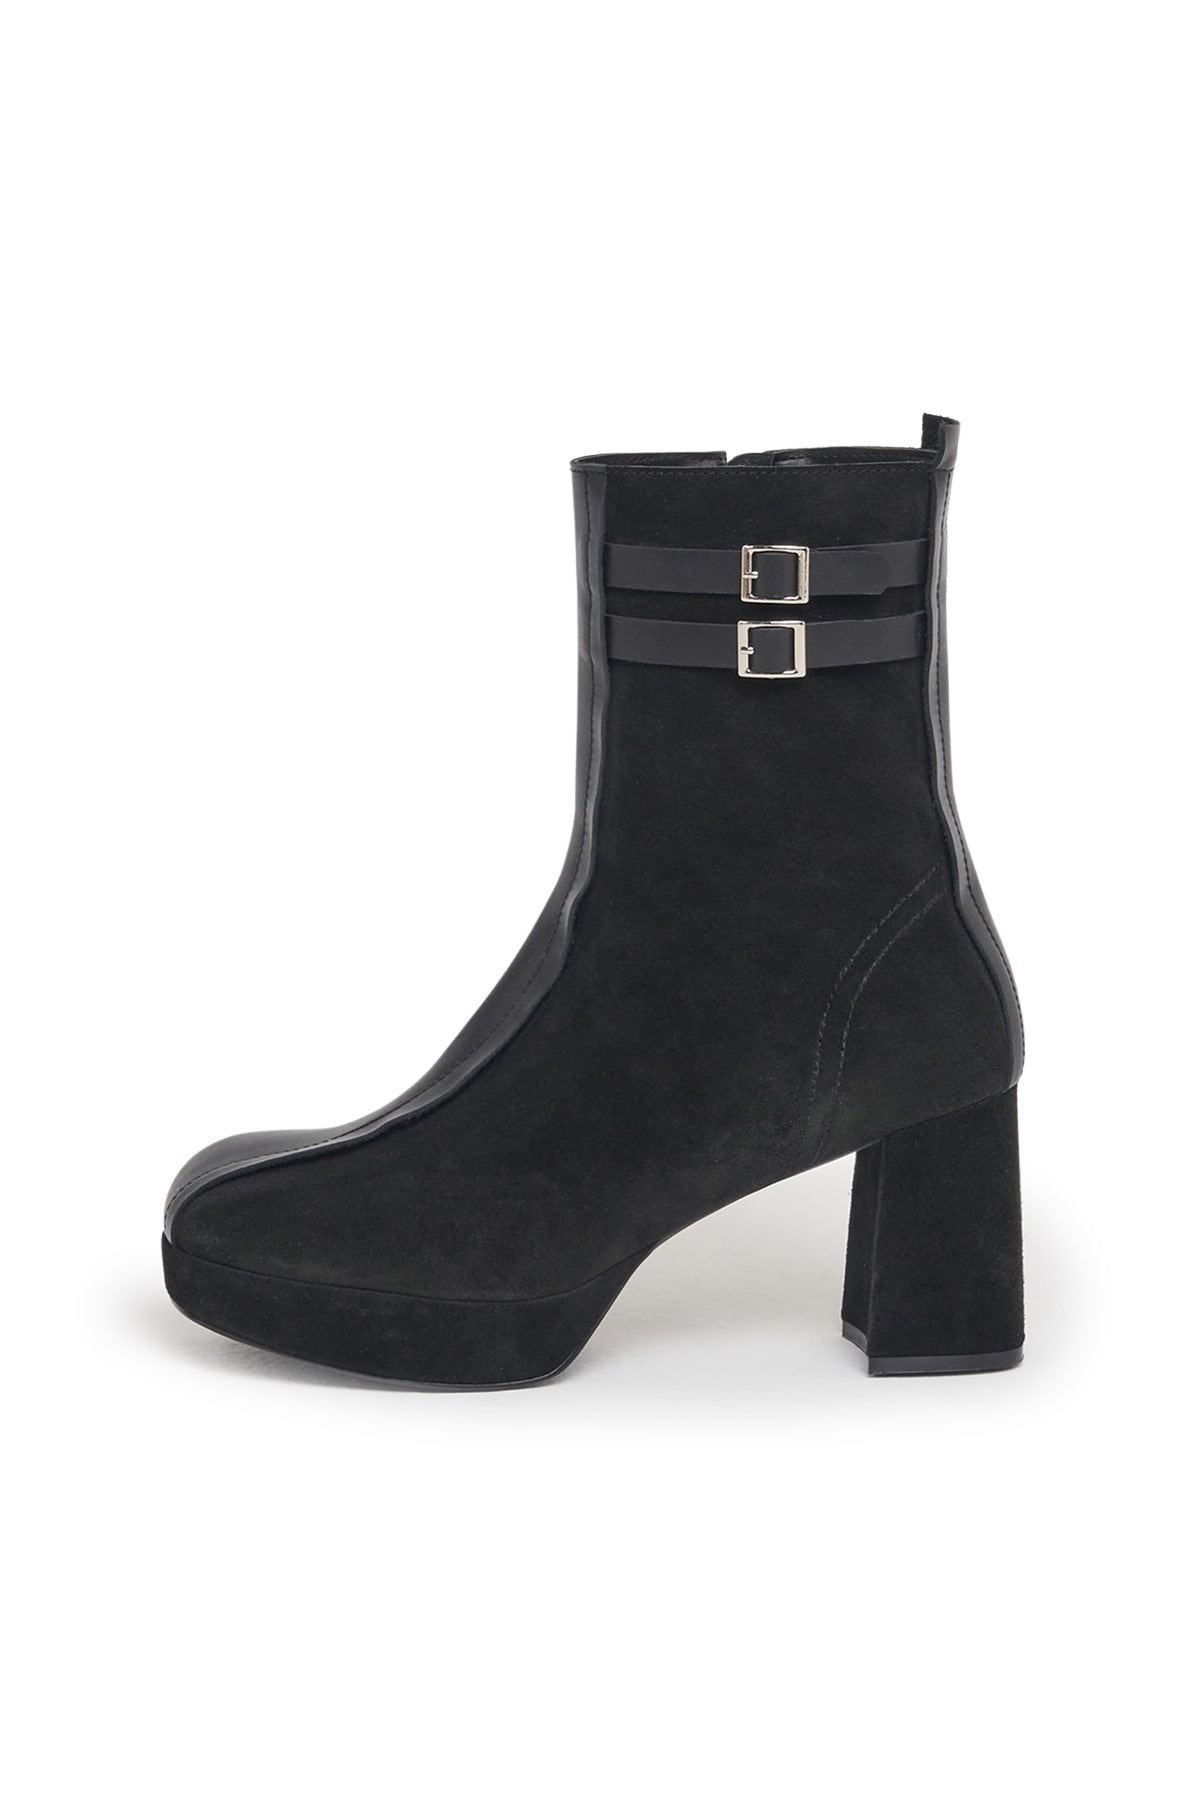 ROUND ANKLE BOOTS IN BLACK